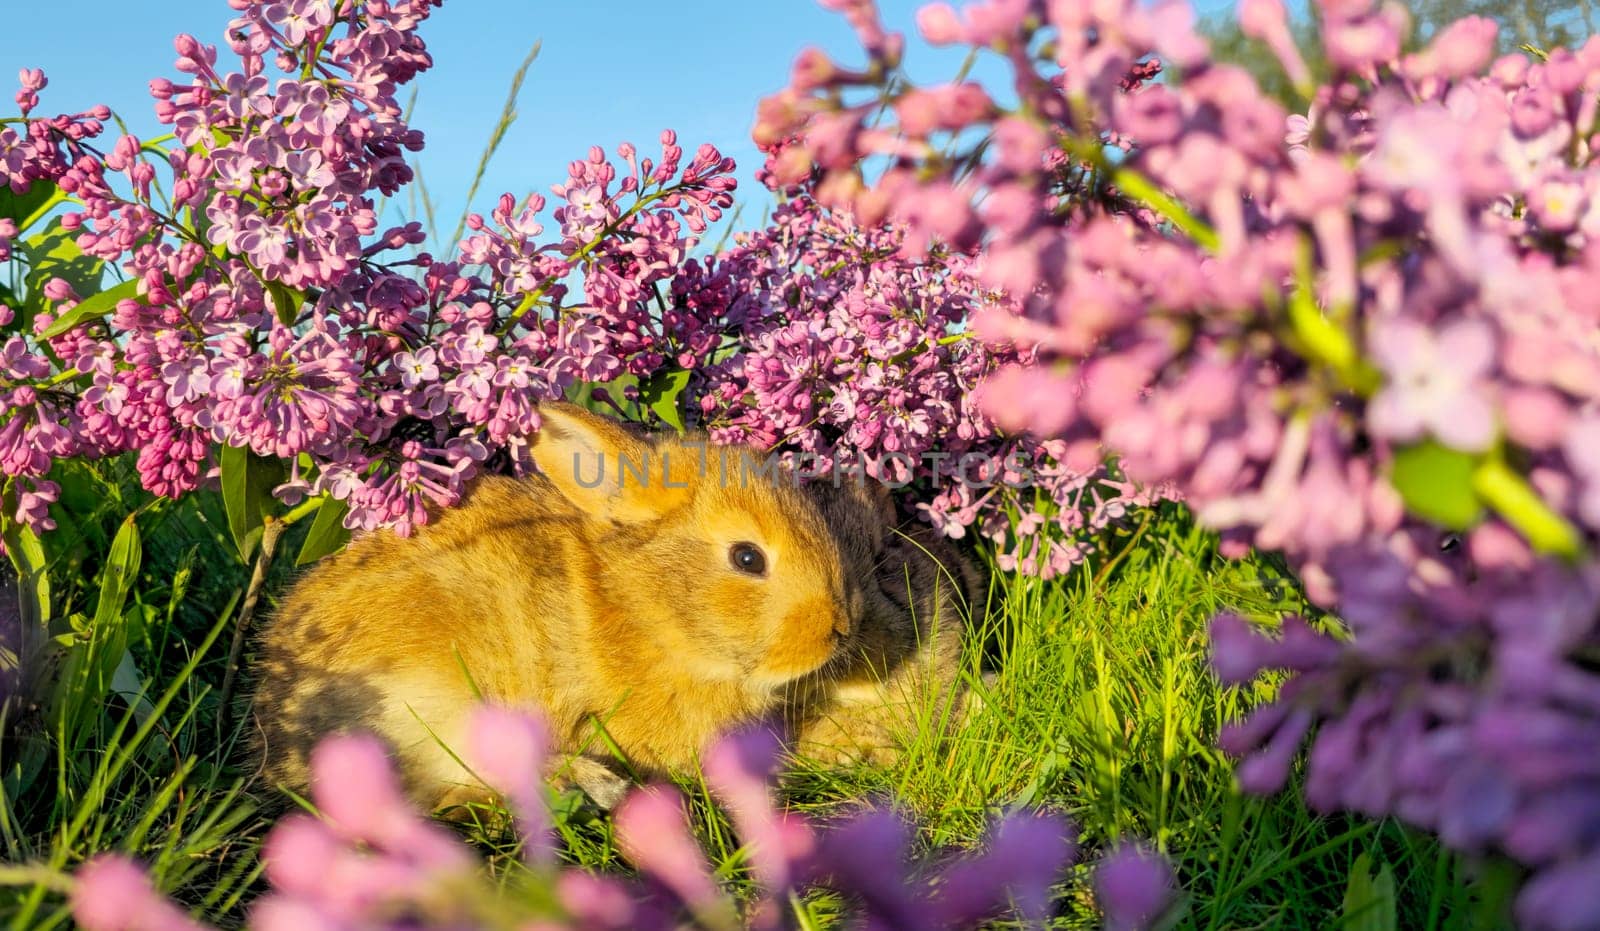 rabbit among lilac flowers in the sunset raysspring and summer